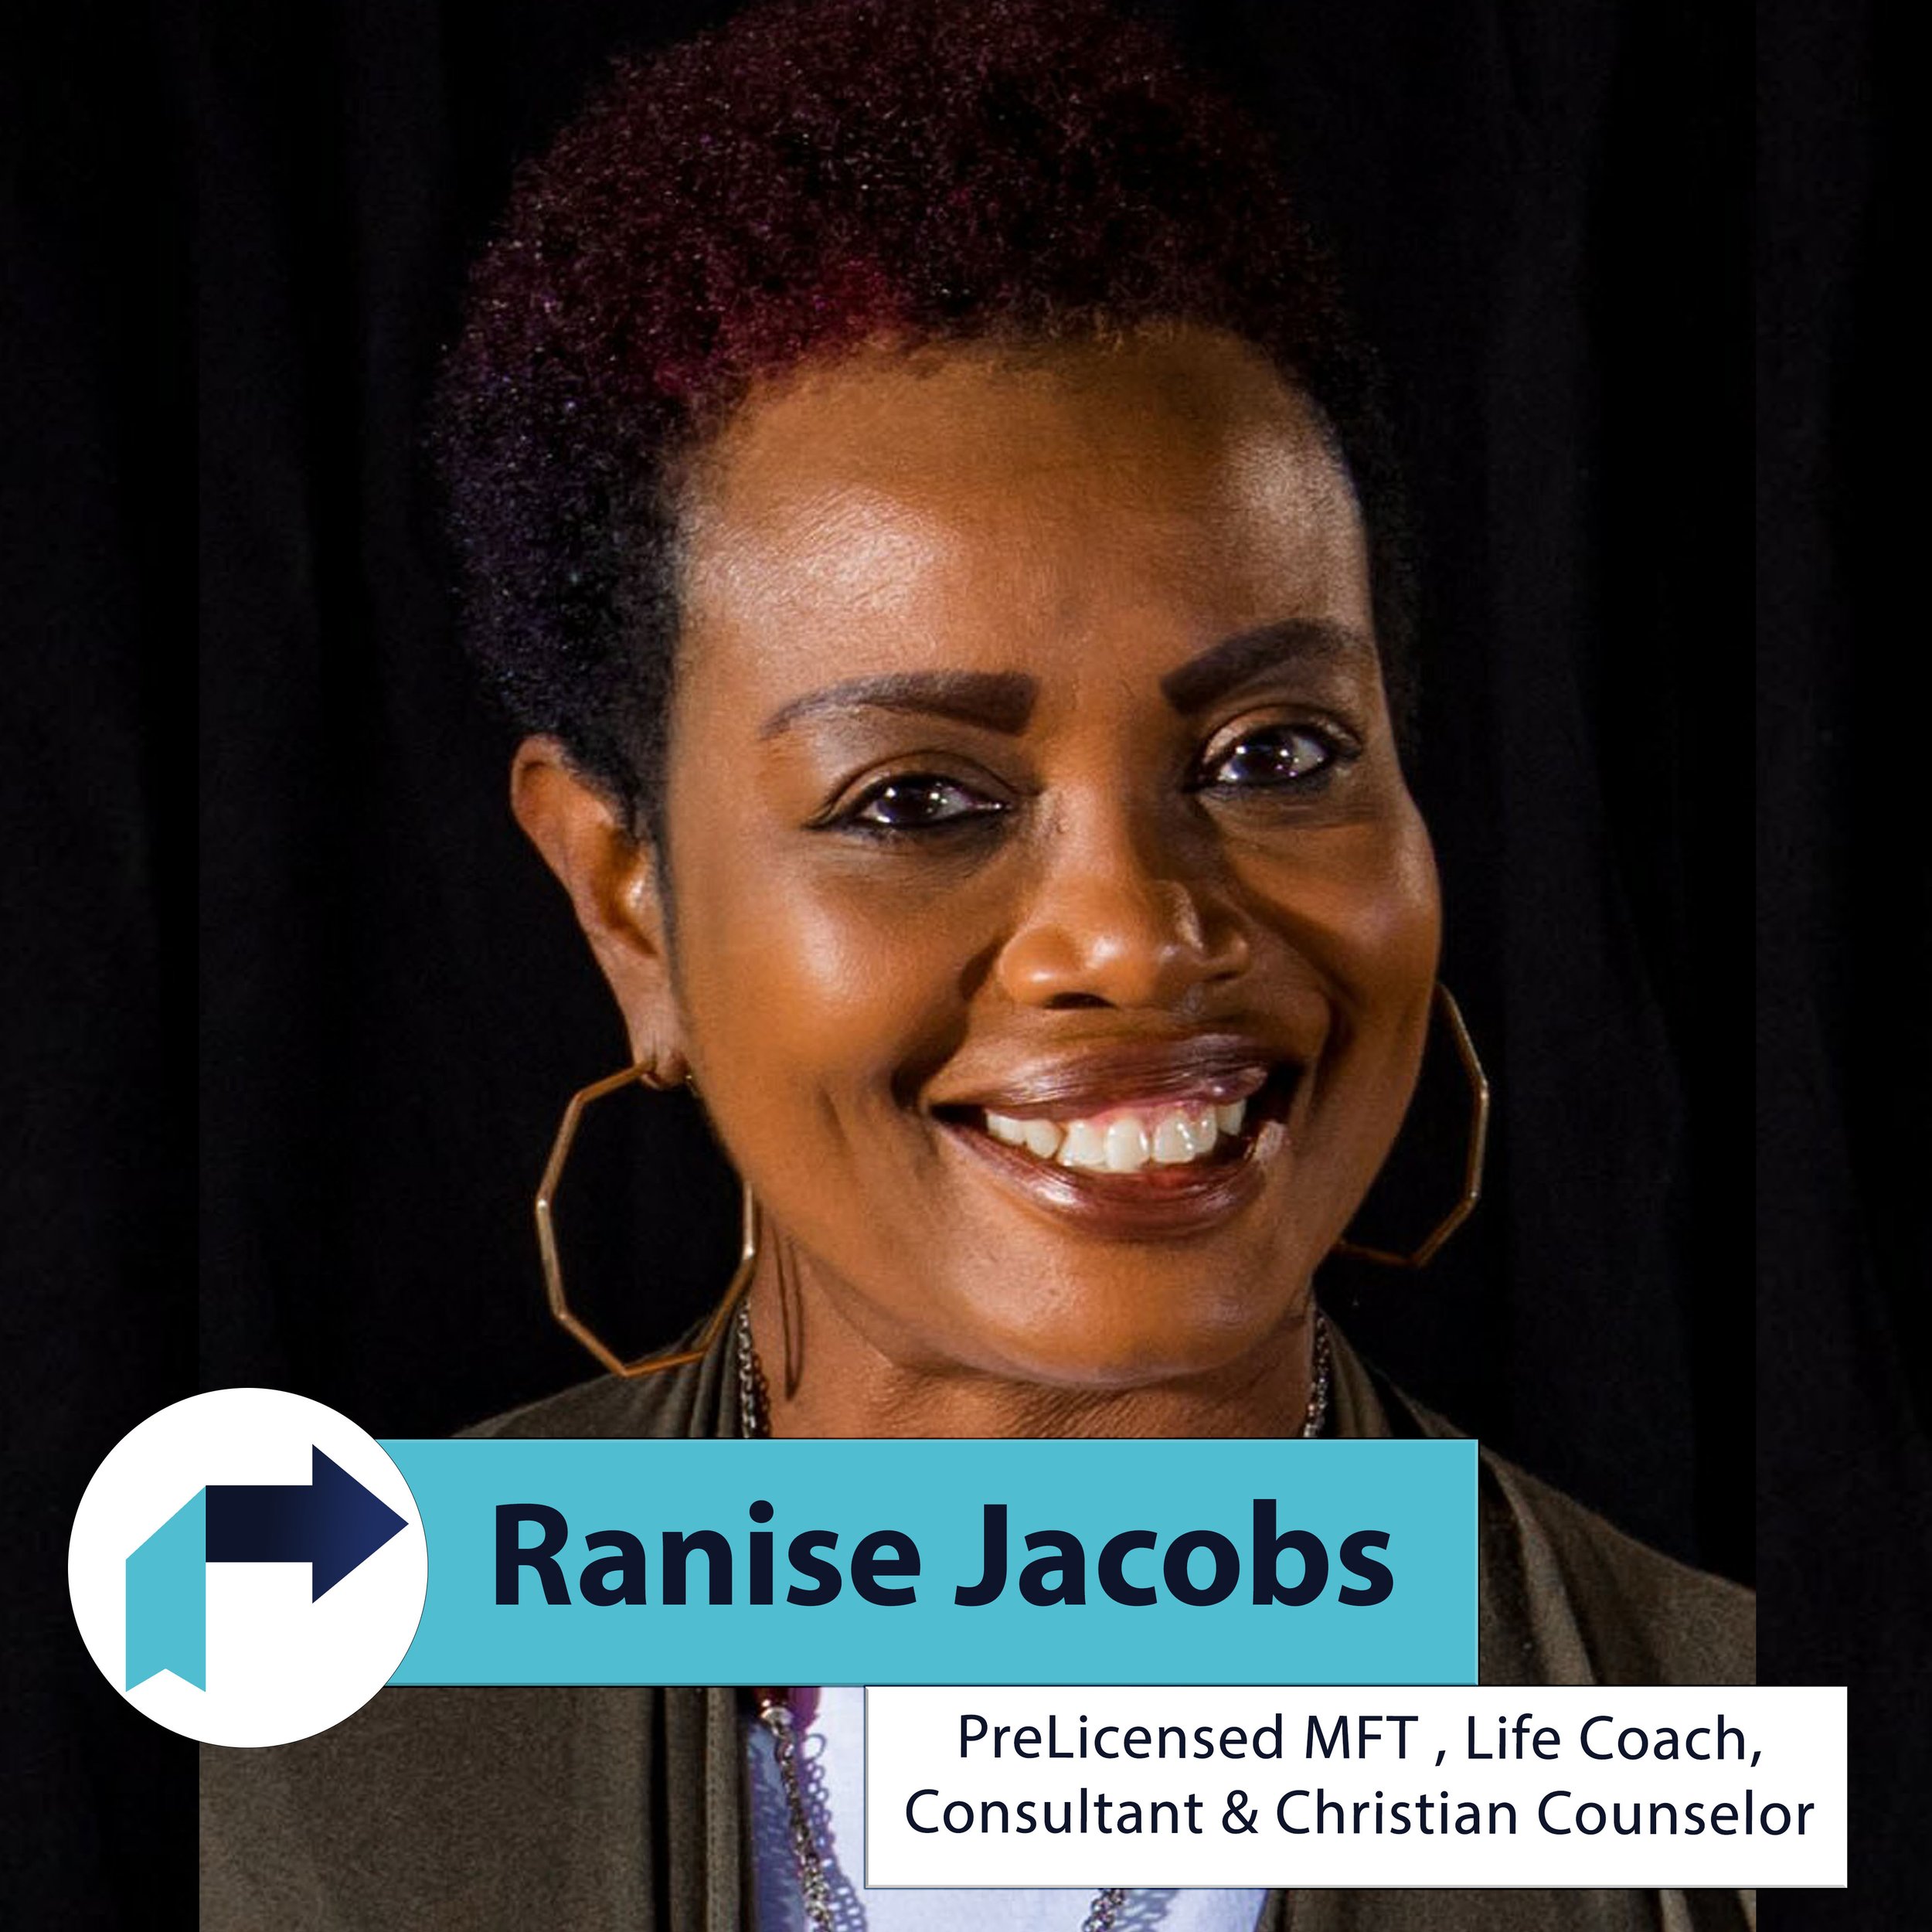 Ranise Jacobs, PreLicensed MFT , Life Coach, Consultant & Christian Counselor